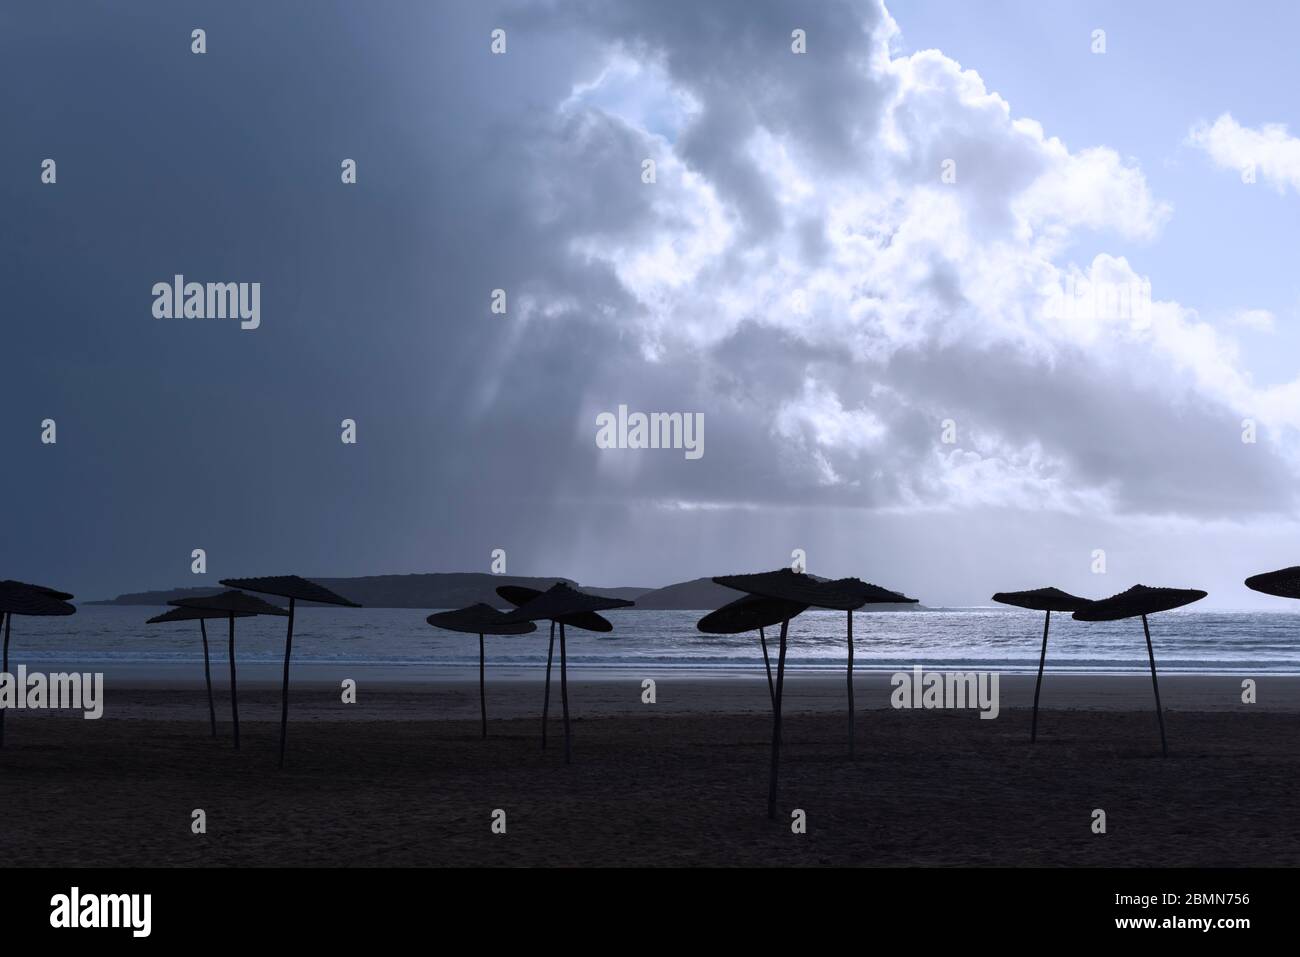 Empty beach with parasols against dark cloudy sky. Evening atmosphere. Stock Photo